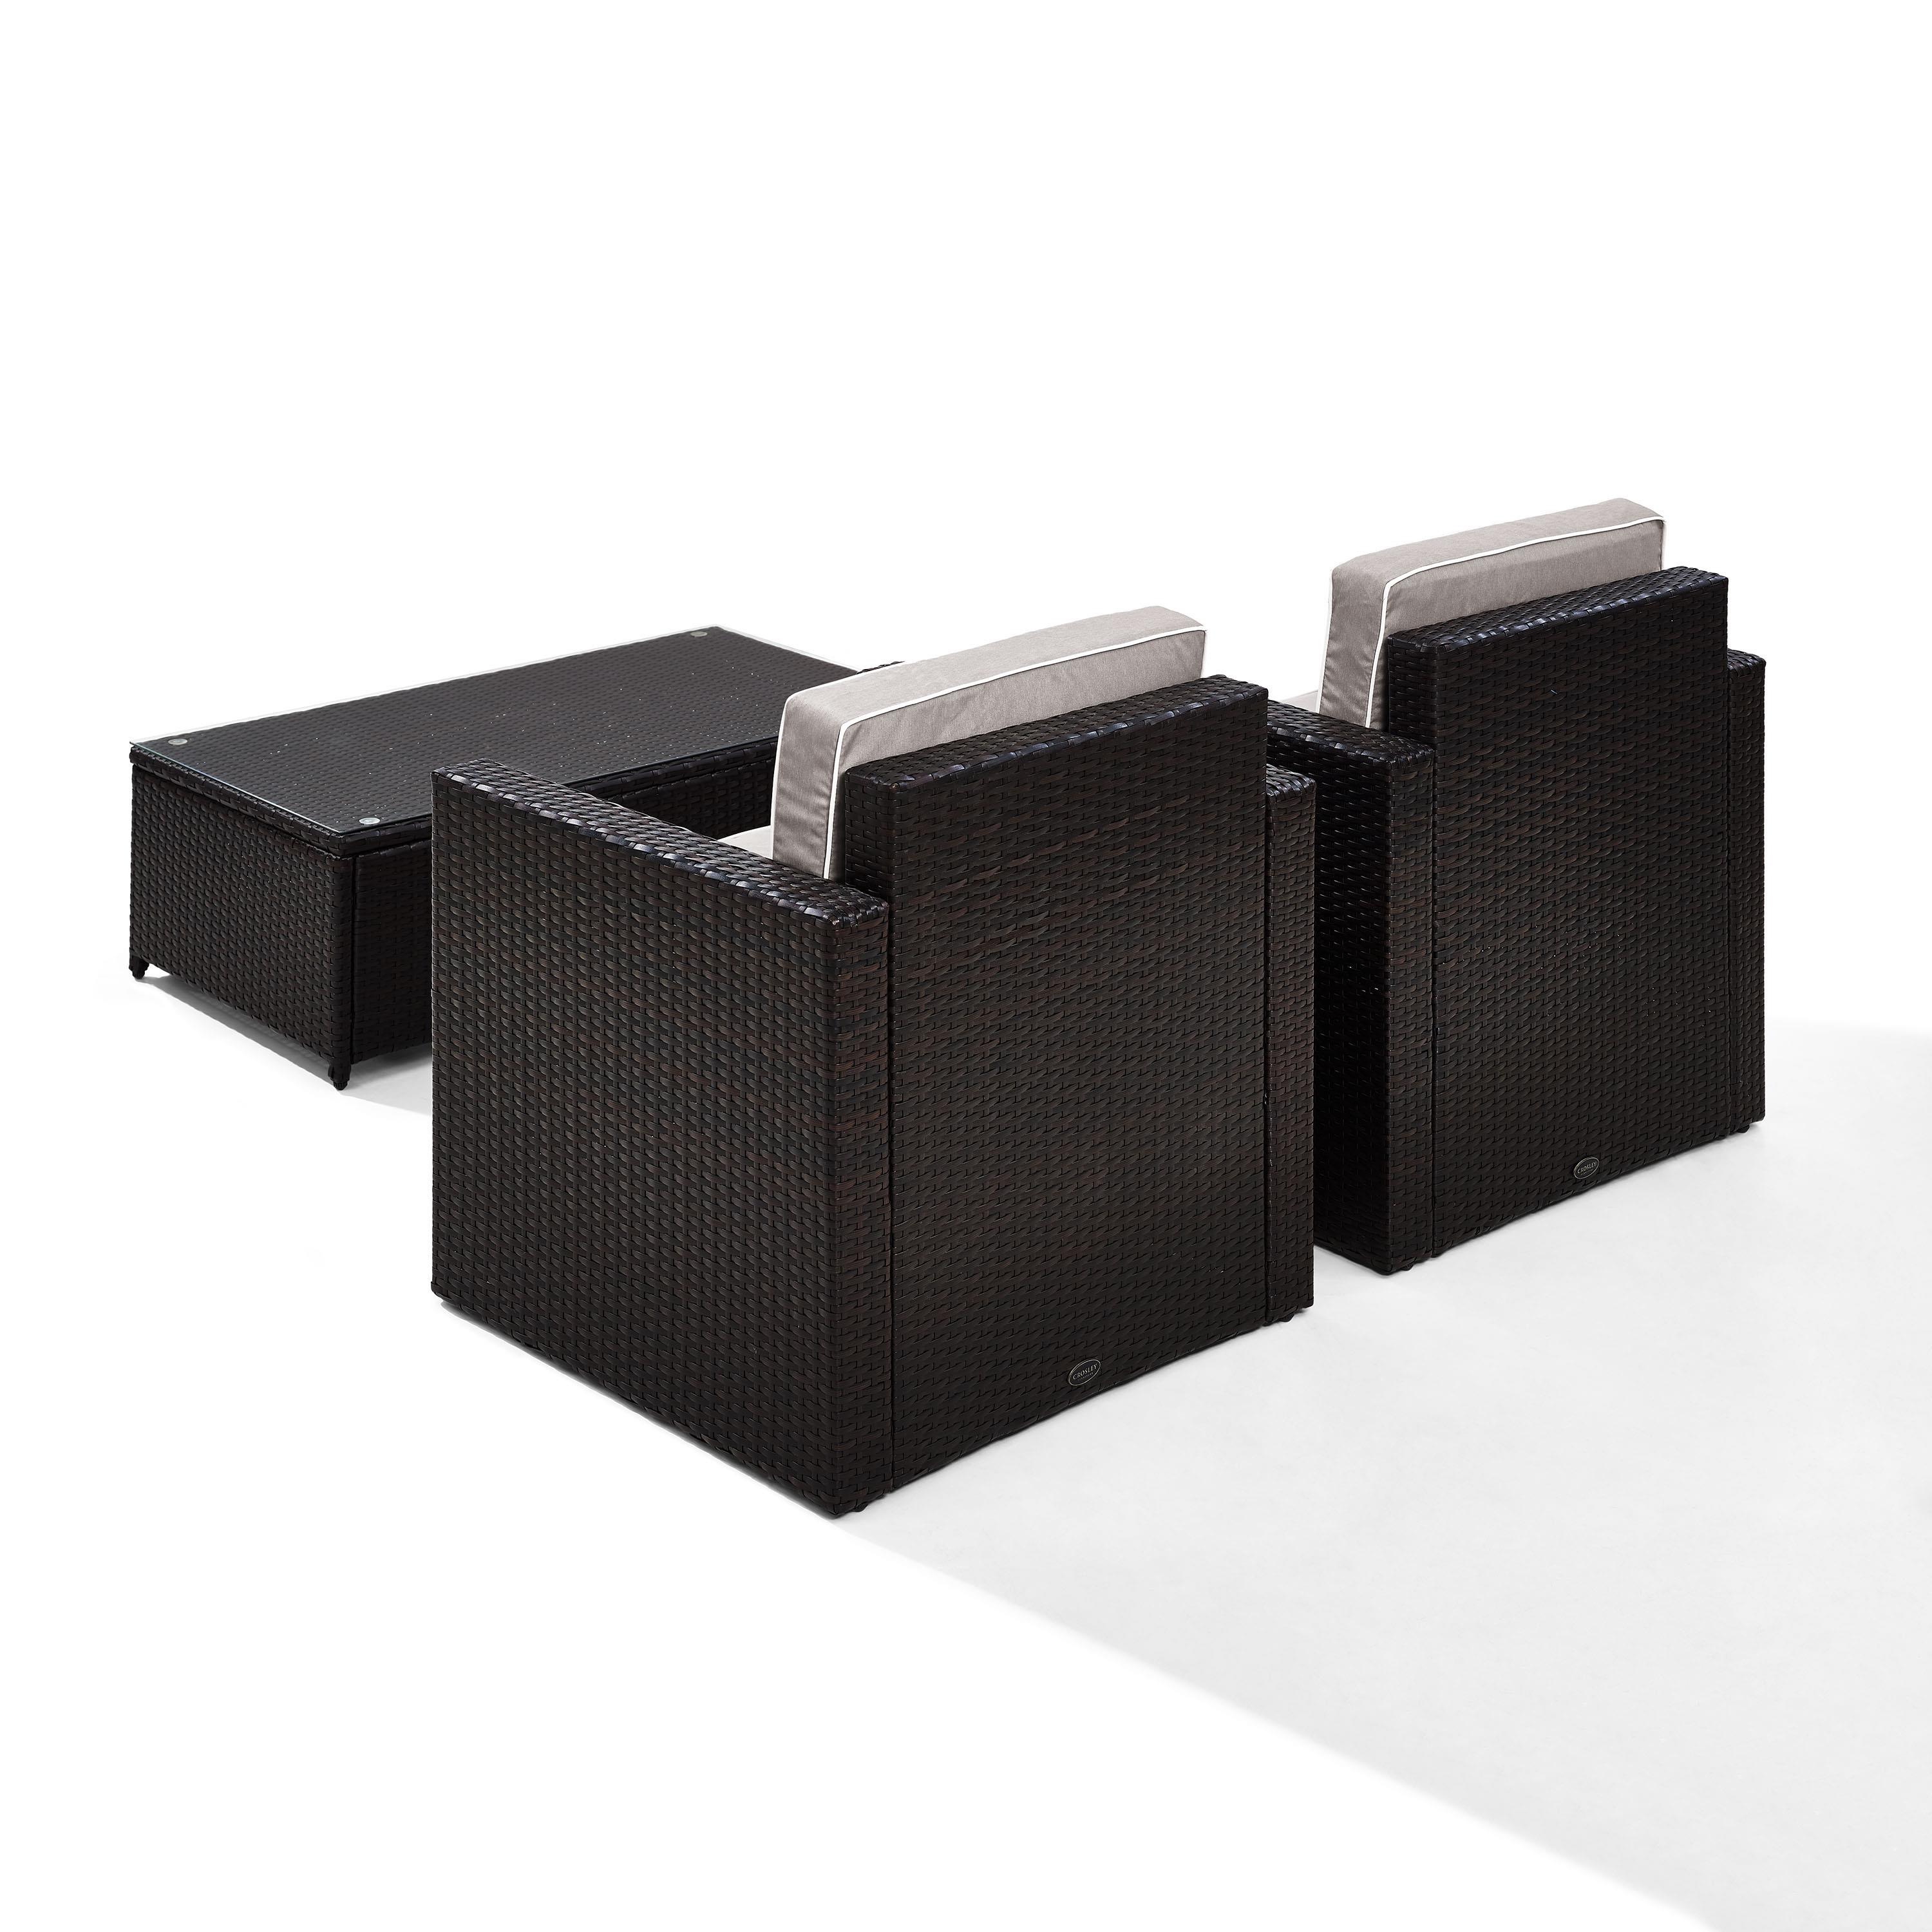 Crosley Palm Harbor 3 Piece Wicker Patio Conversation Set in Brown and Gray - image 3 of 7